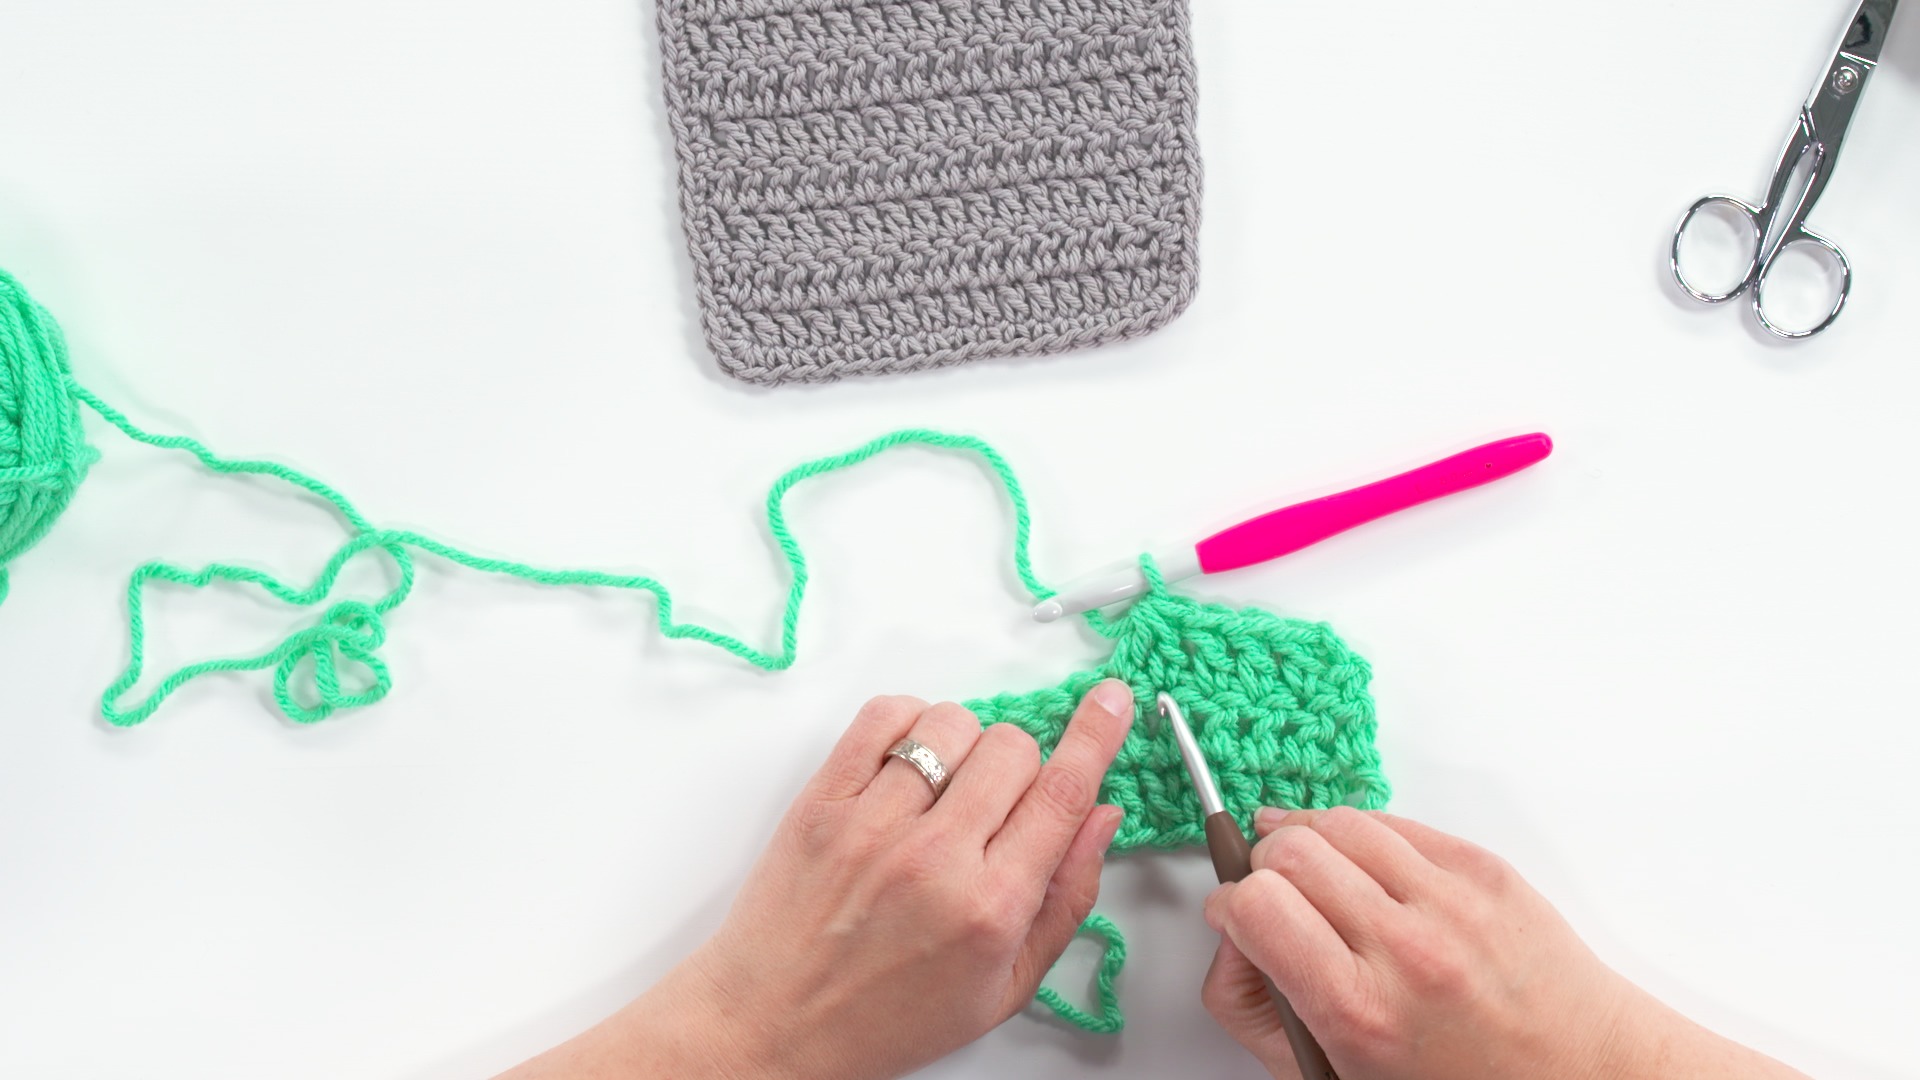 14-Day Learn to Crochet Series: Day 8